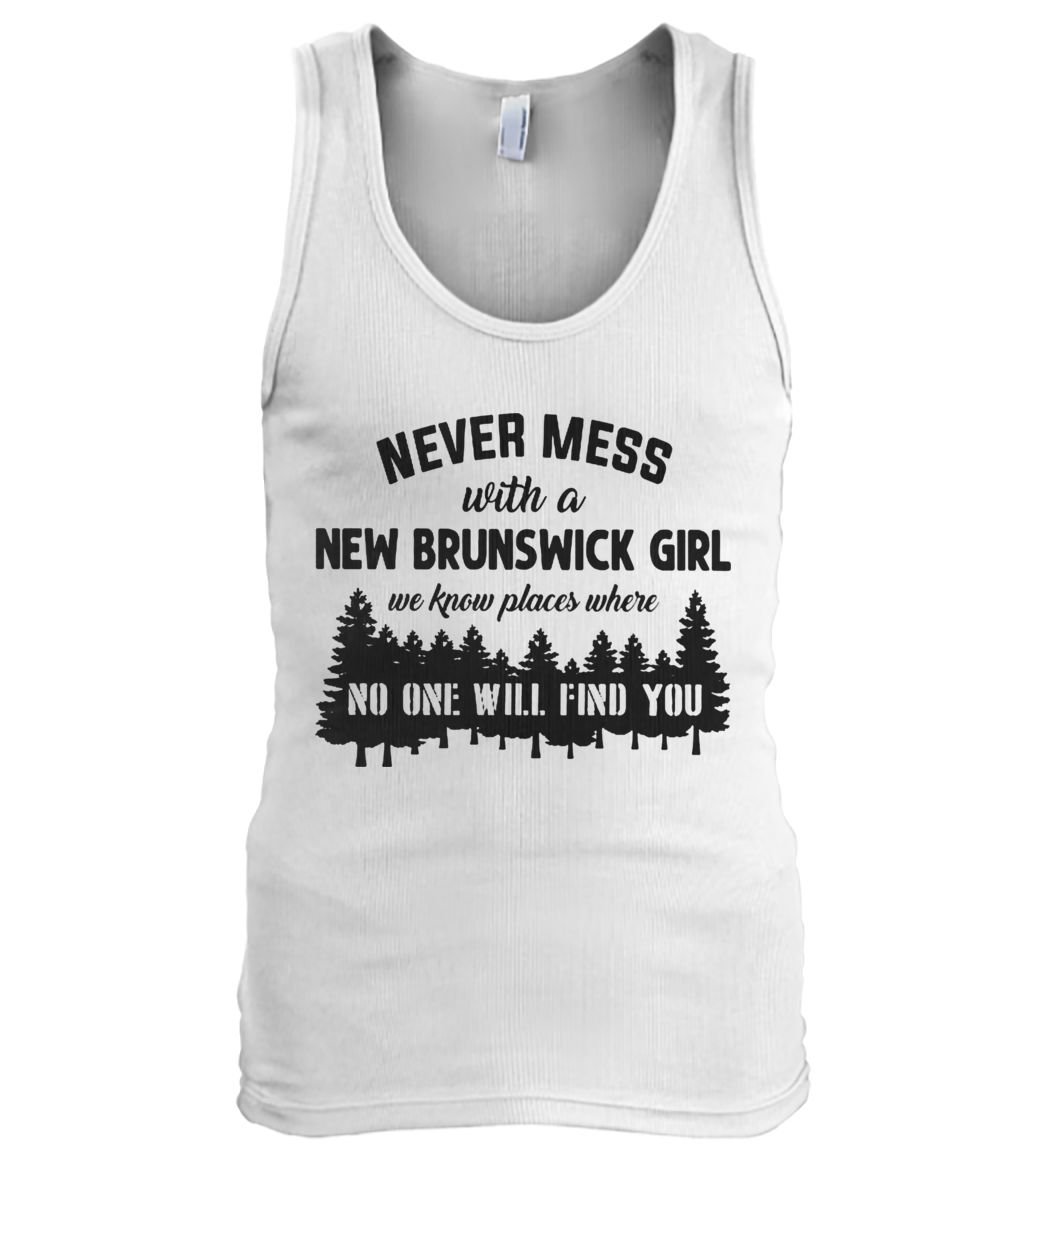 Never mess with a new brunswick girl we know places where no one will find you men's tank top